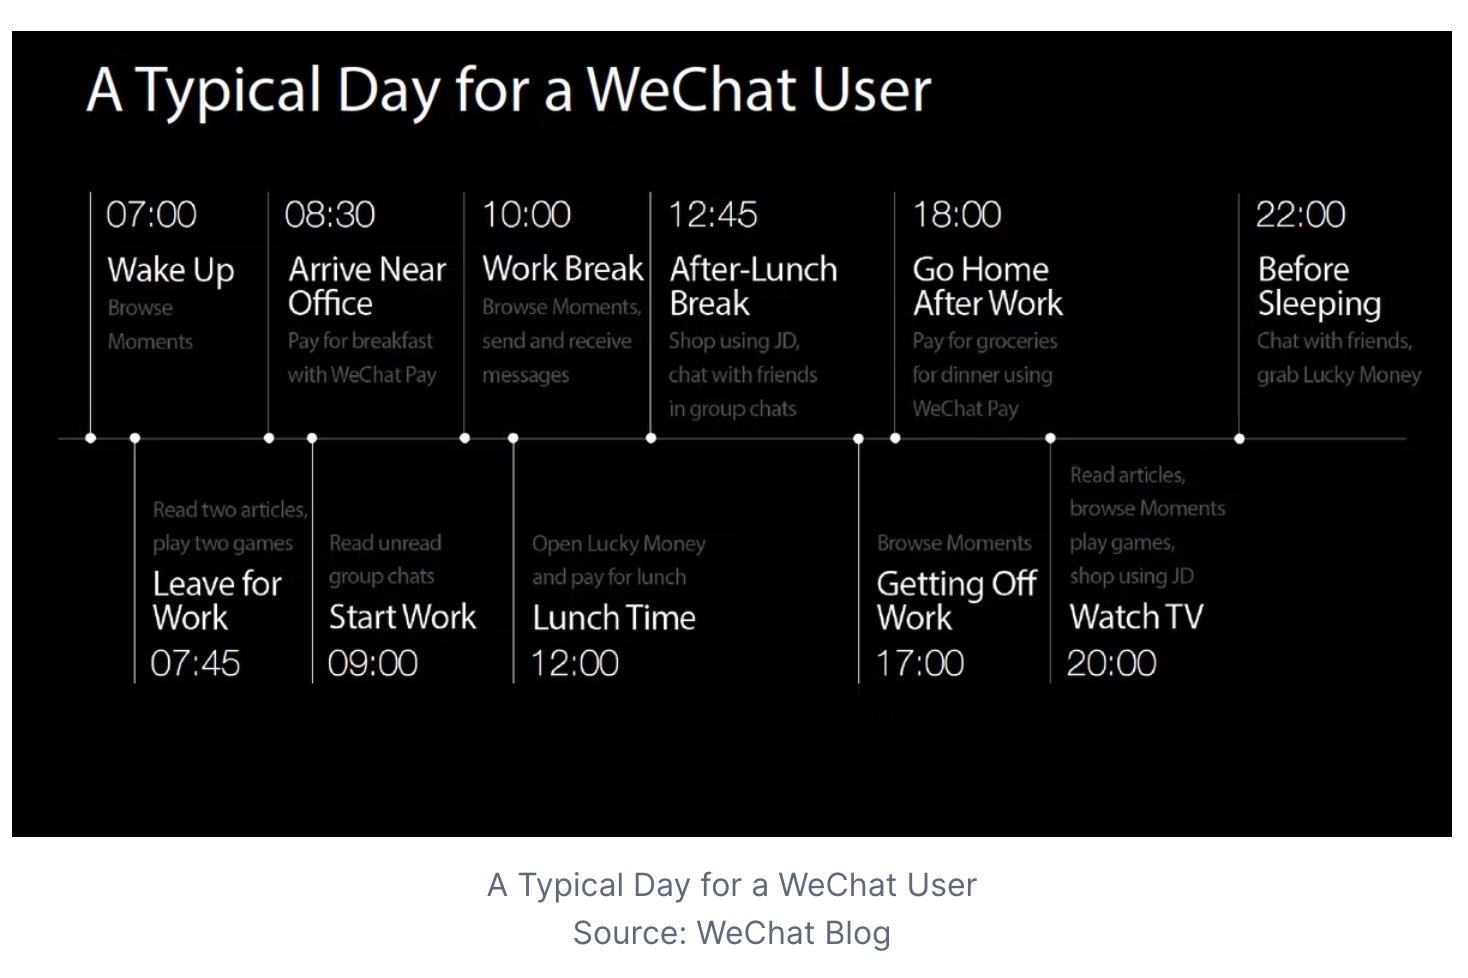 Wechat users